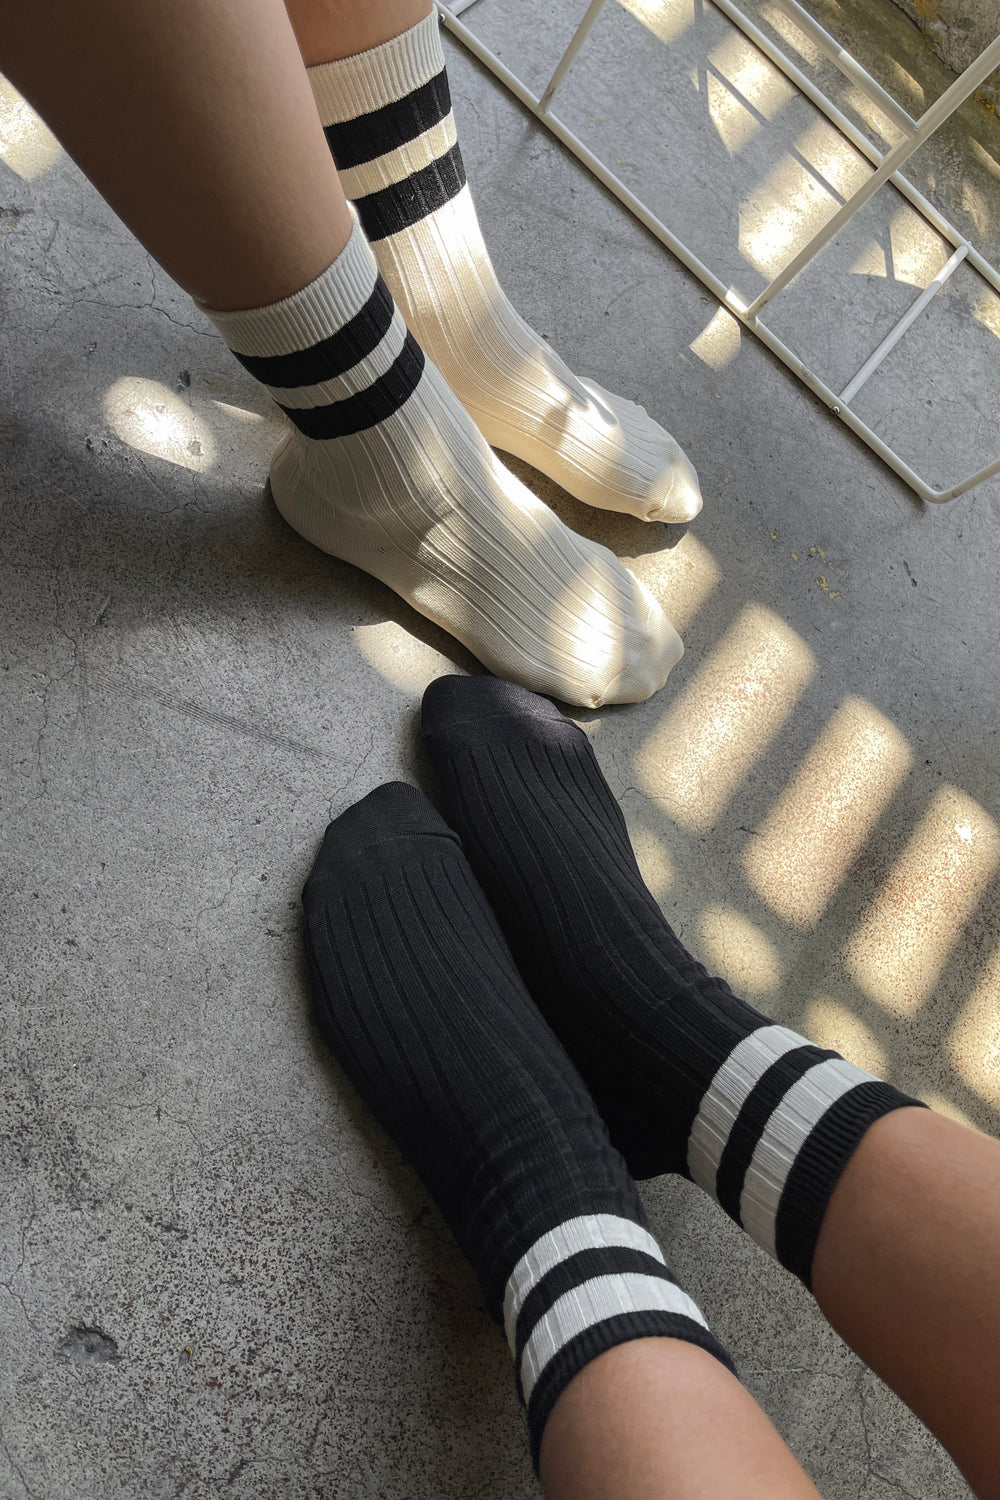 Her Varsity Socks is a varsity striped version of Le Bon's OG Her Socks which are classically ribbed, perfect height, cotton blend durable, chic go to socks. Add an understated sporty touch to any look with this bold stripe contrast version of Her Socks.